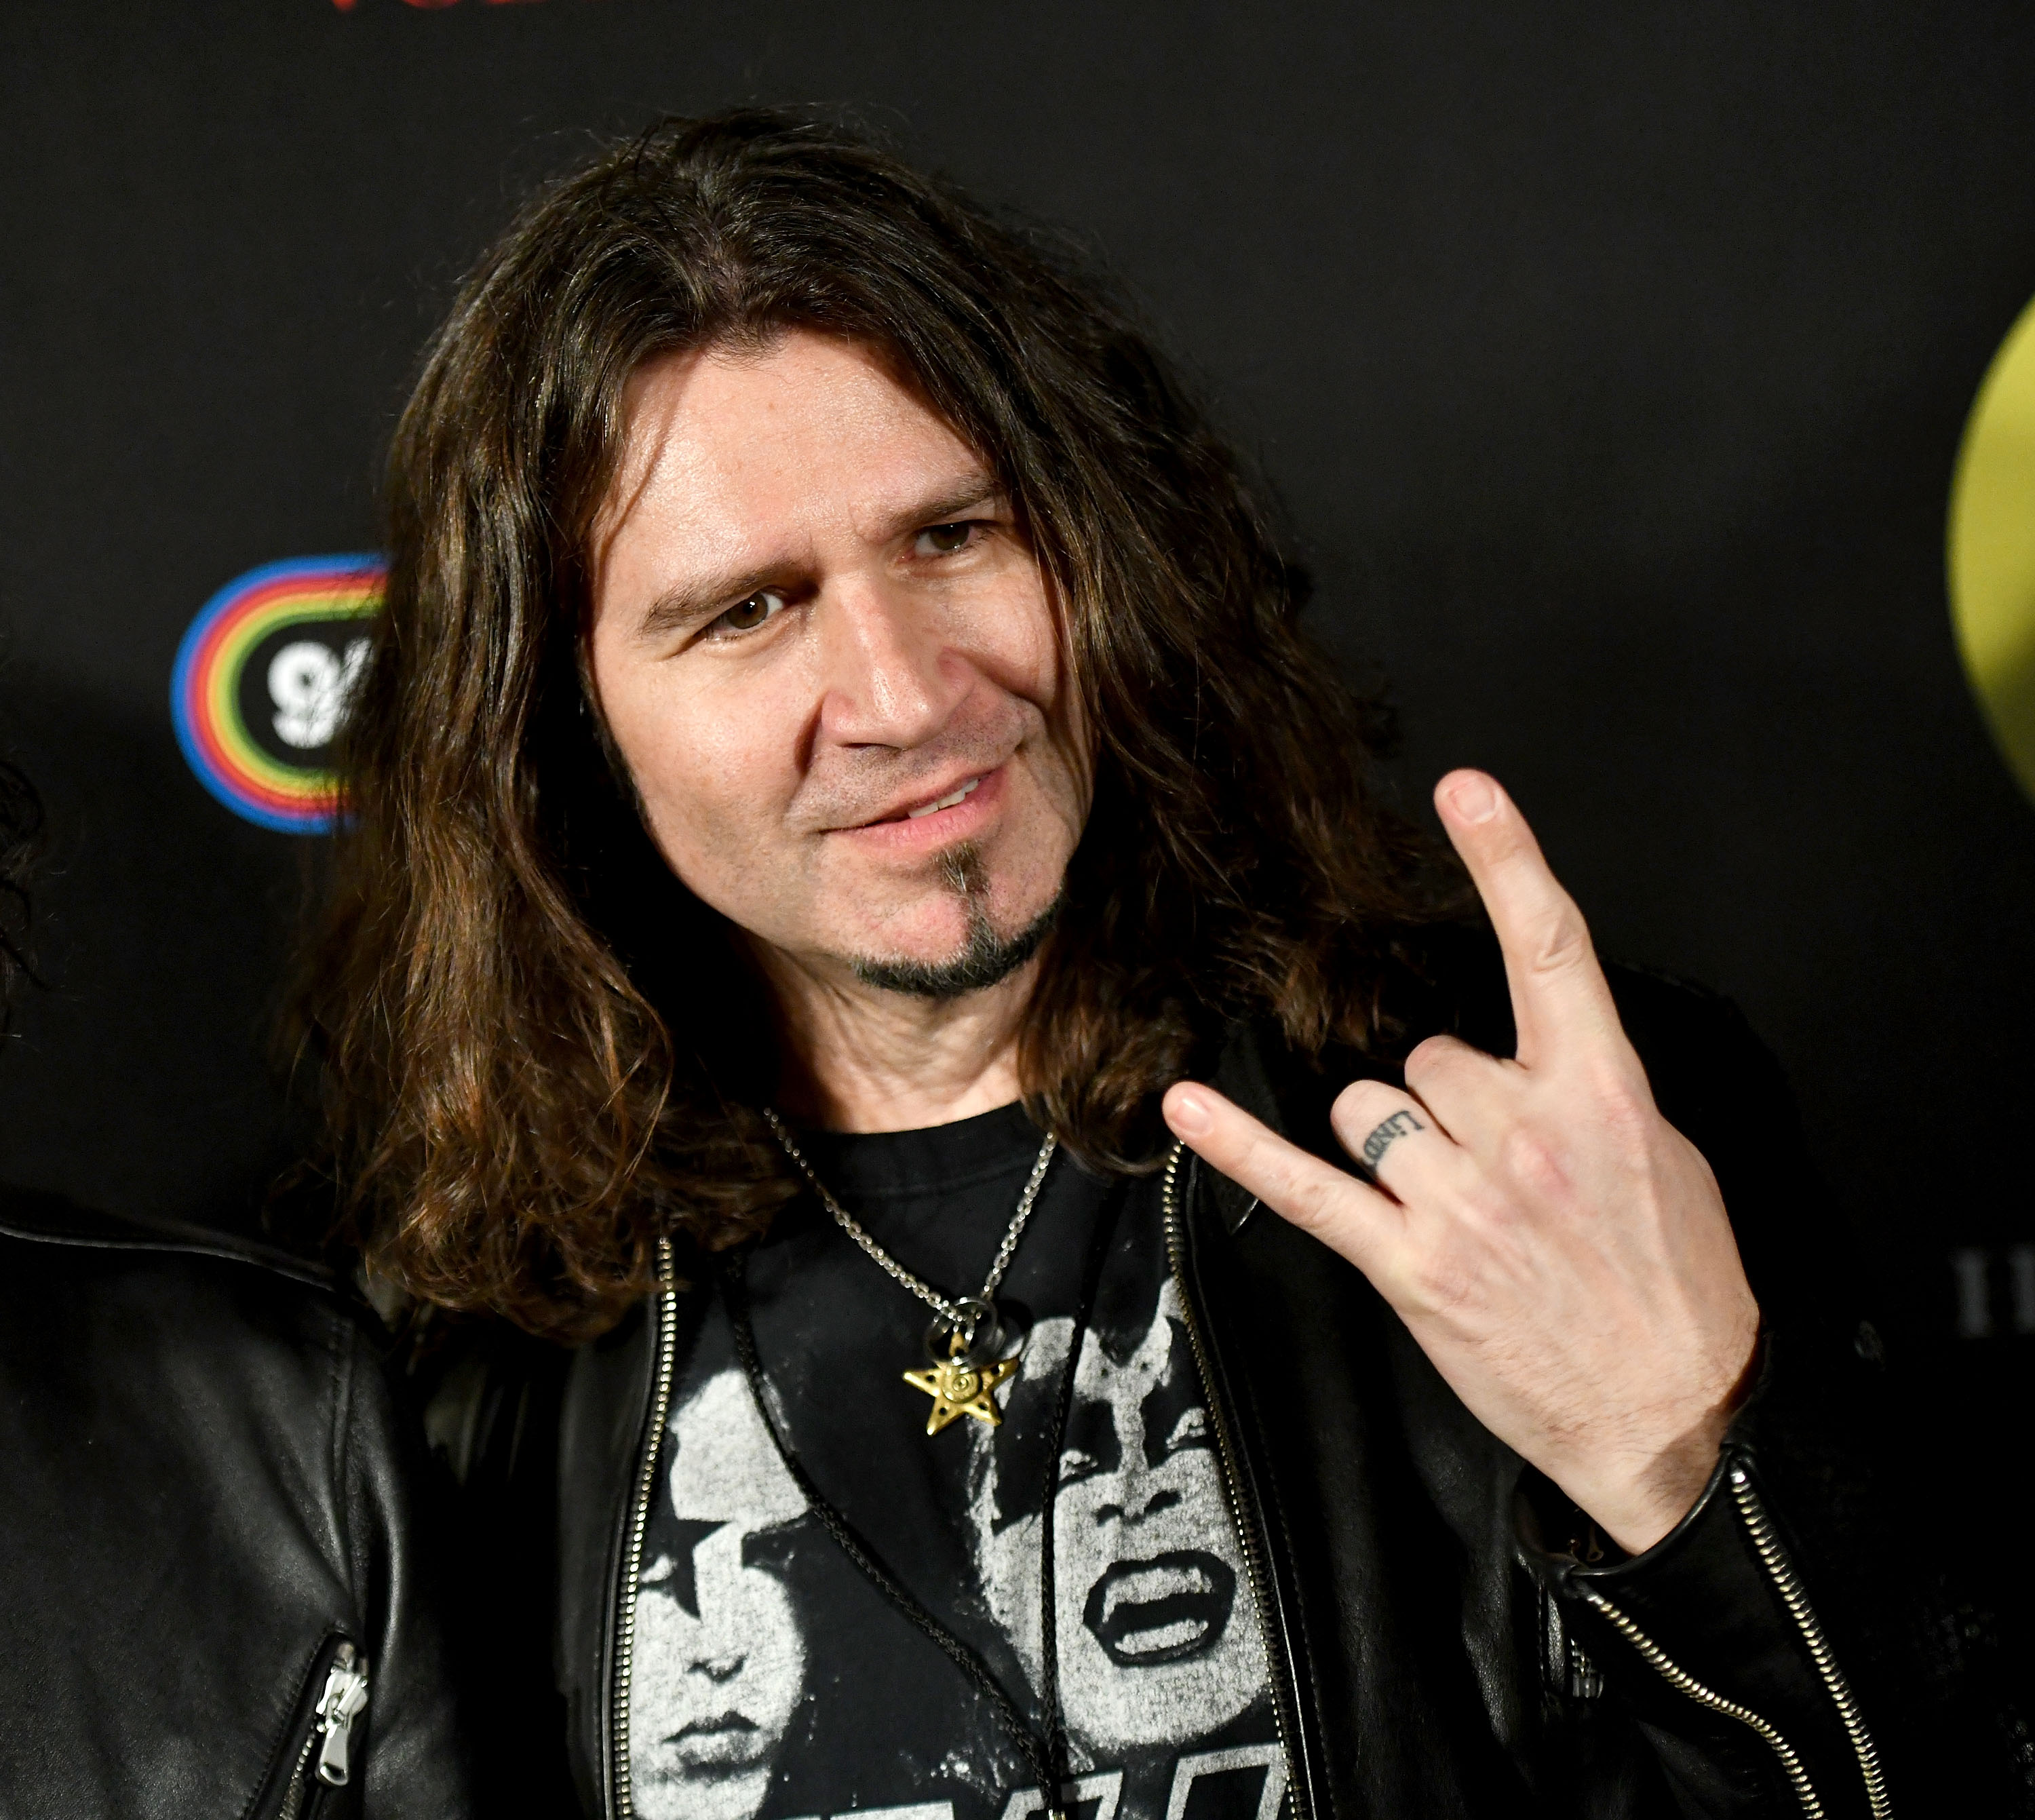 Guitarist Phil X of the band Bon Jovi attends the Adopt the Arts annual rock gala at Avalon Hollywood on January 31, 2018 in Los Angeles, California | Photo: GettyImages